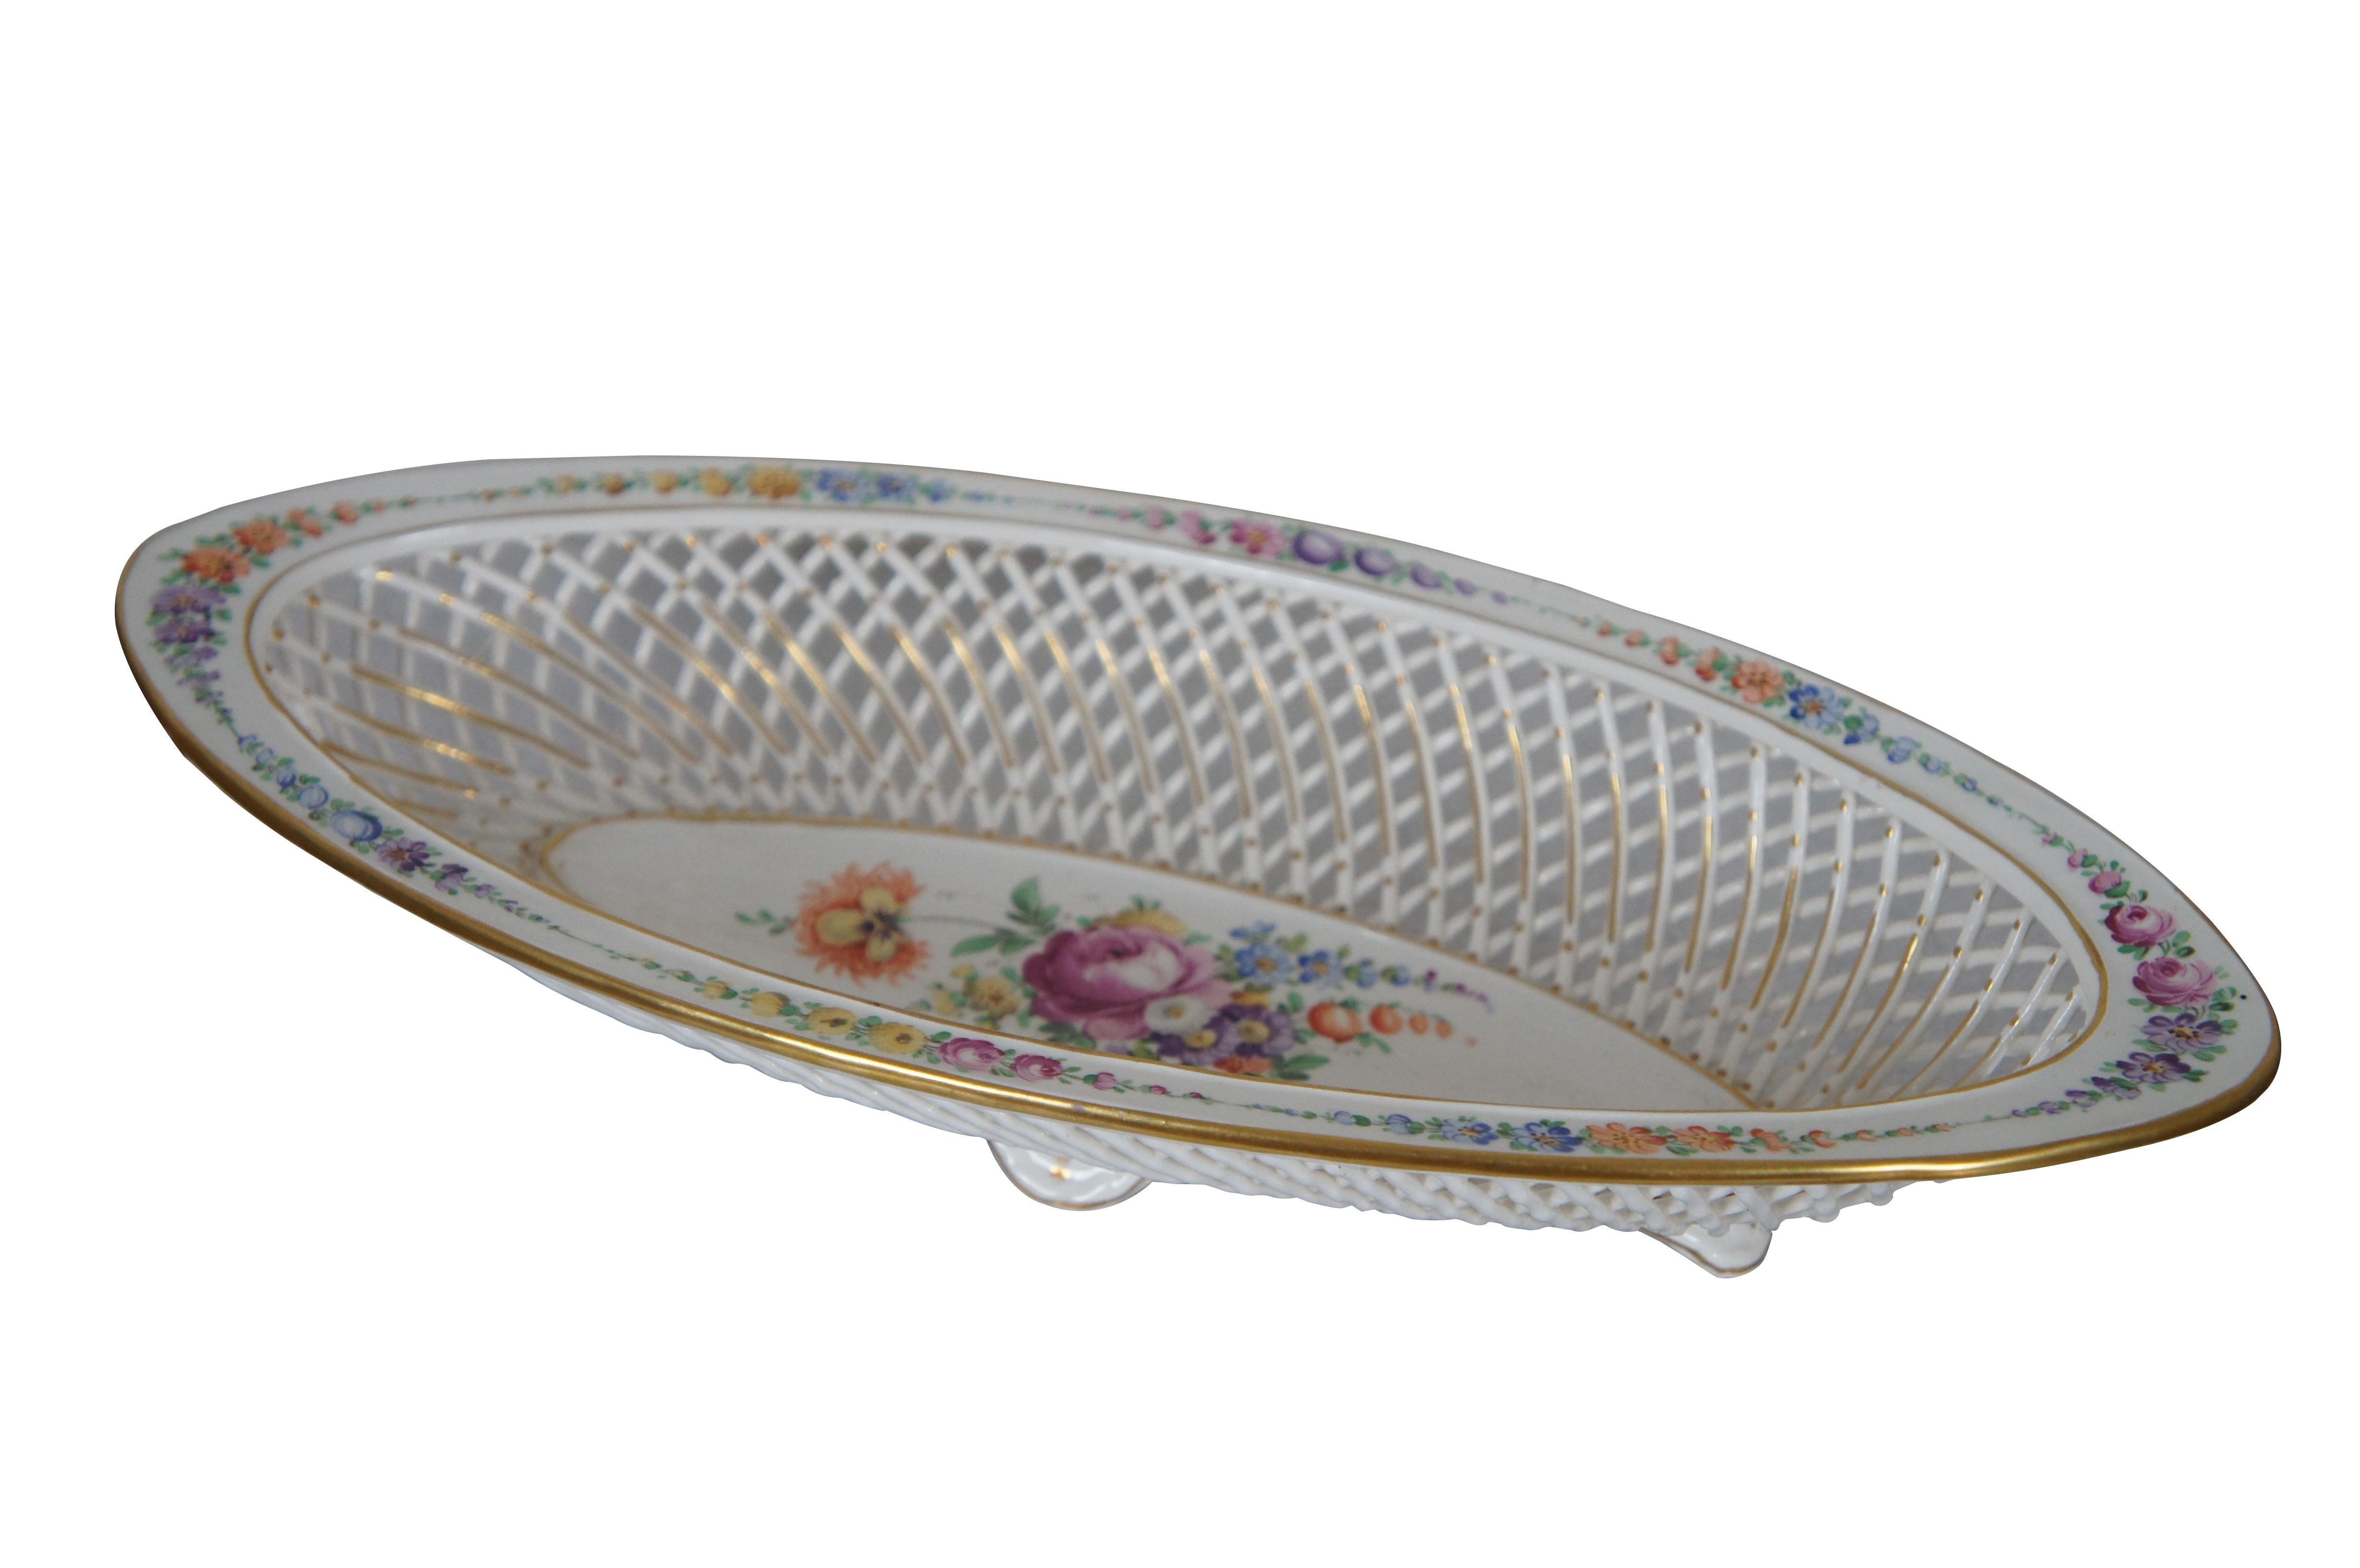 Large antique Dresden Germany crown mark bowl or compote. Made of porcelain featuring oval form with reticulated basketweave pattern, footed base and colorful floral motif.

Dimensions:
12.5